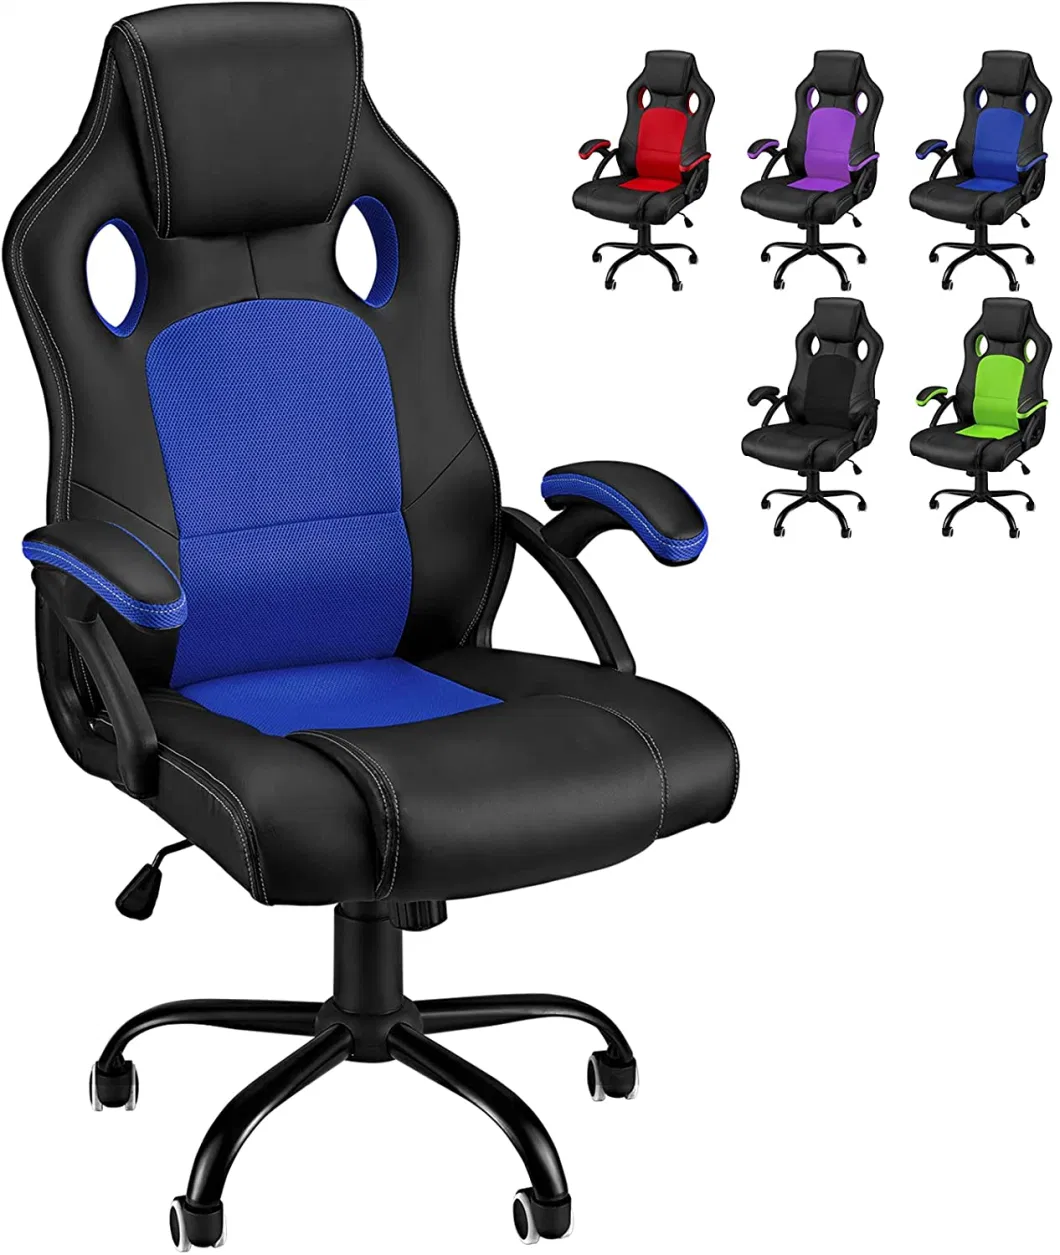 Wood Office Chair Smaller Kids Chair Gaming Chair Racing Chair for Children